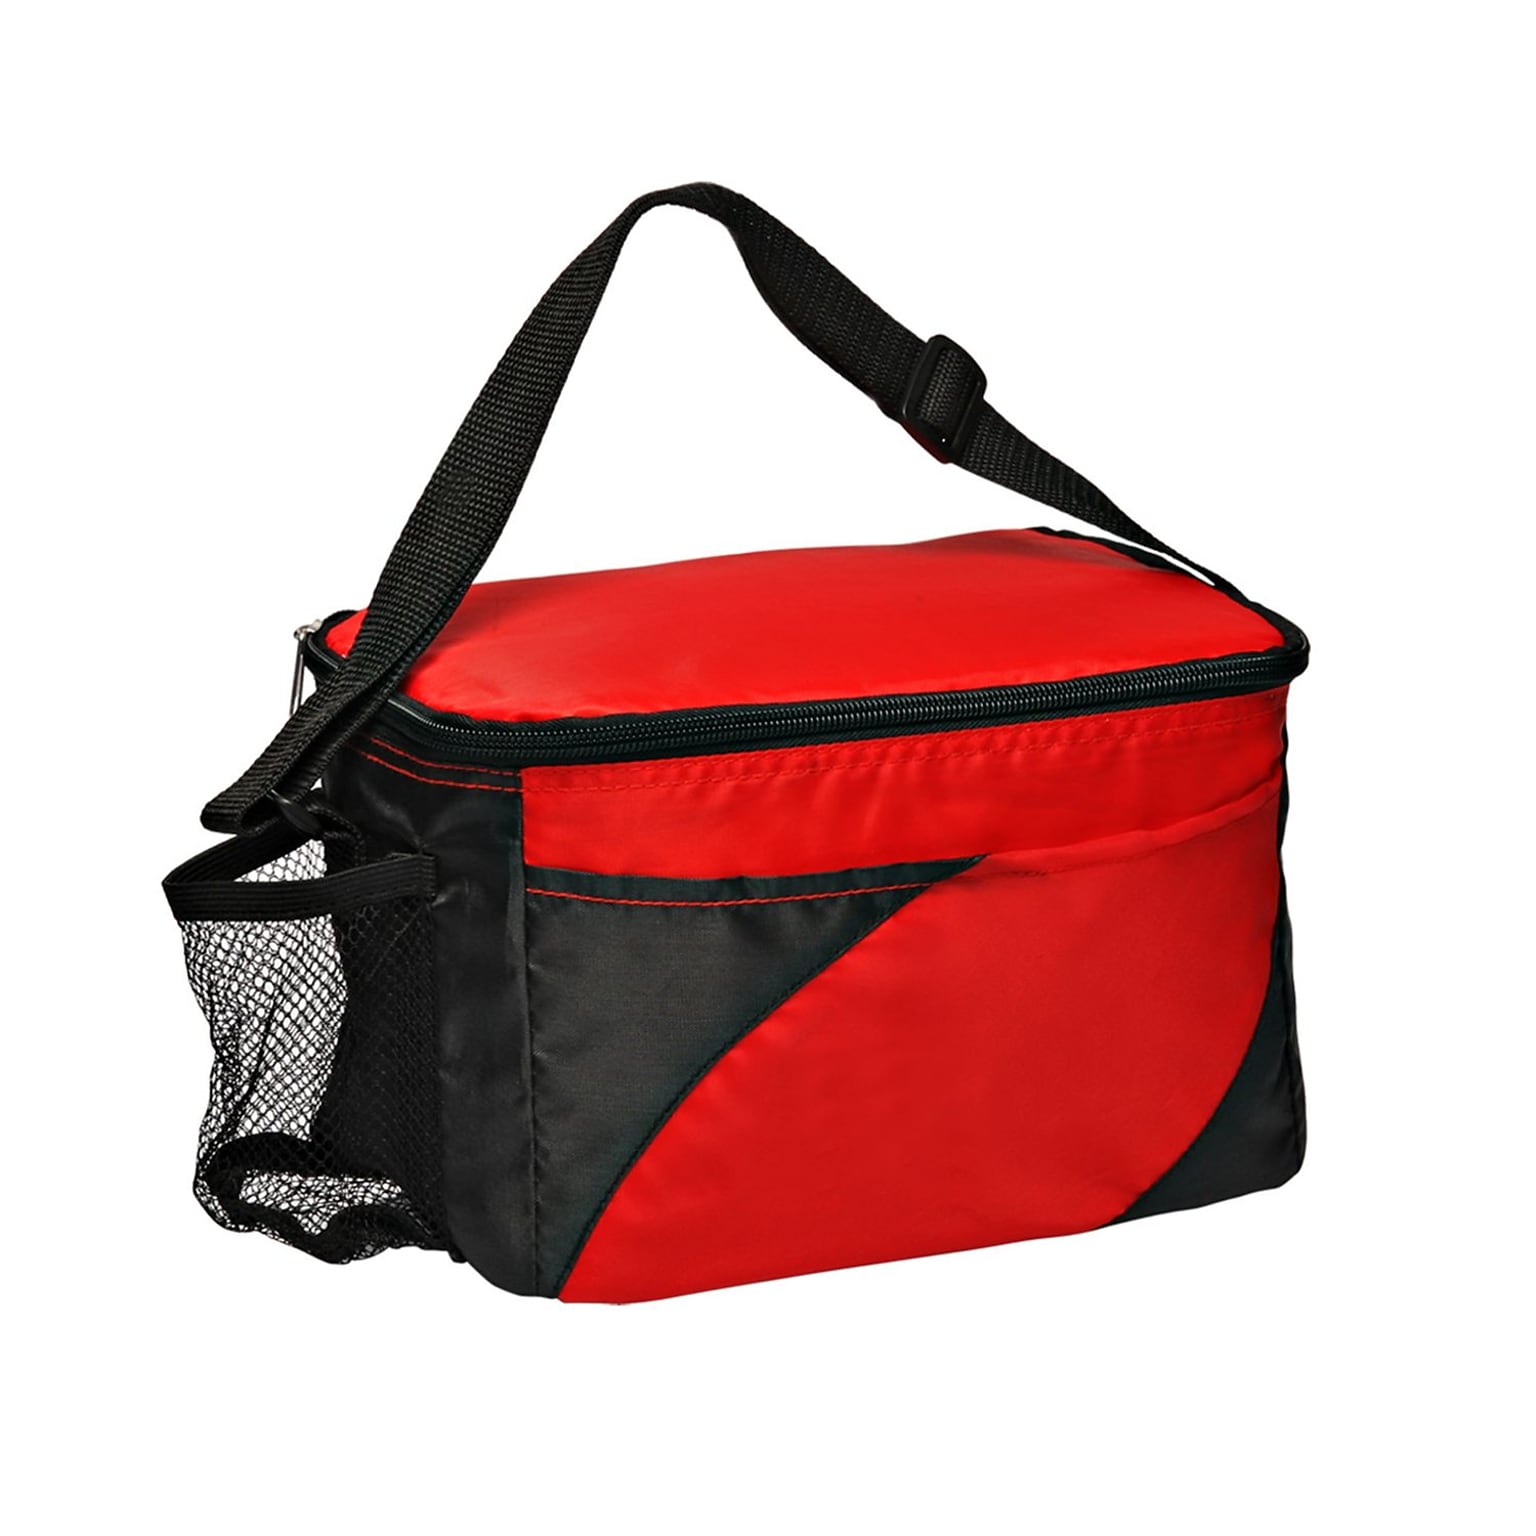 Natico Red and Black Insulated Cooler Bag (60-LN-16RD)